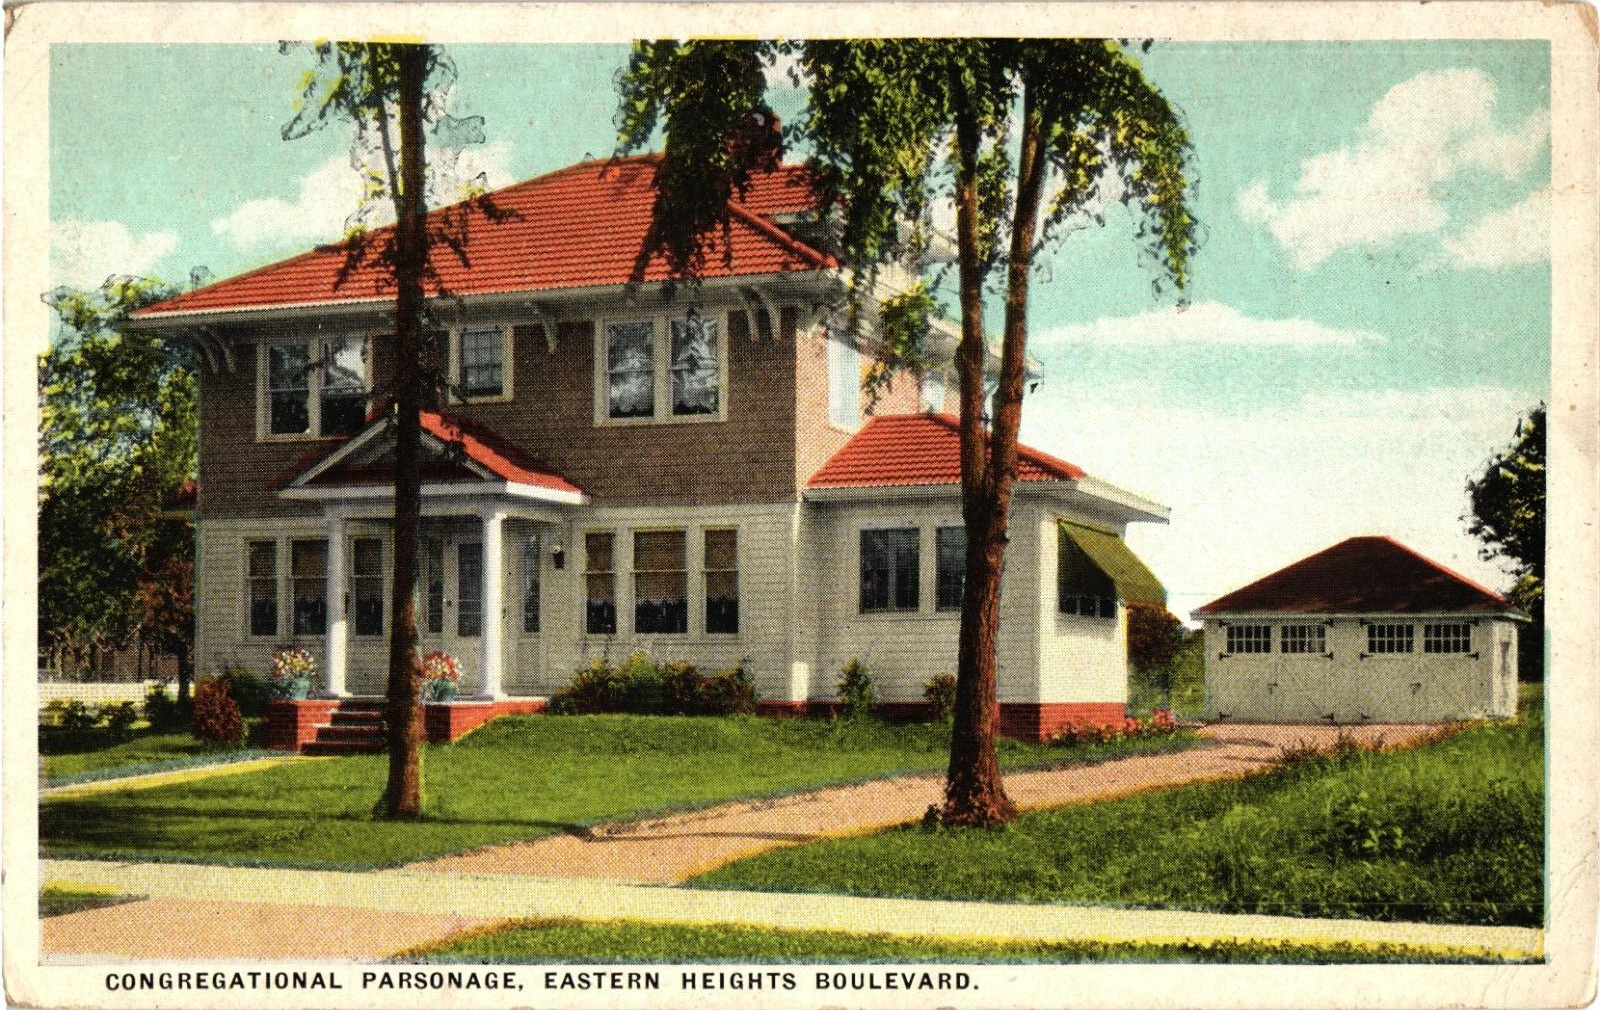 Congregational Parsonage Eastern Heights Blvd Elyria OH Divided Postcard 1920s